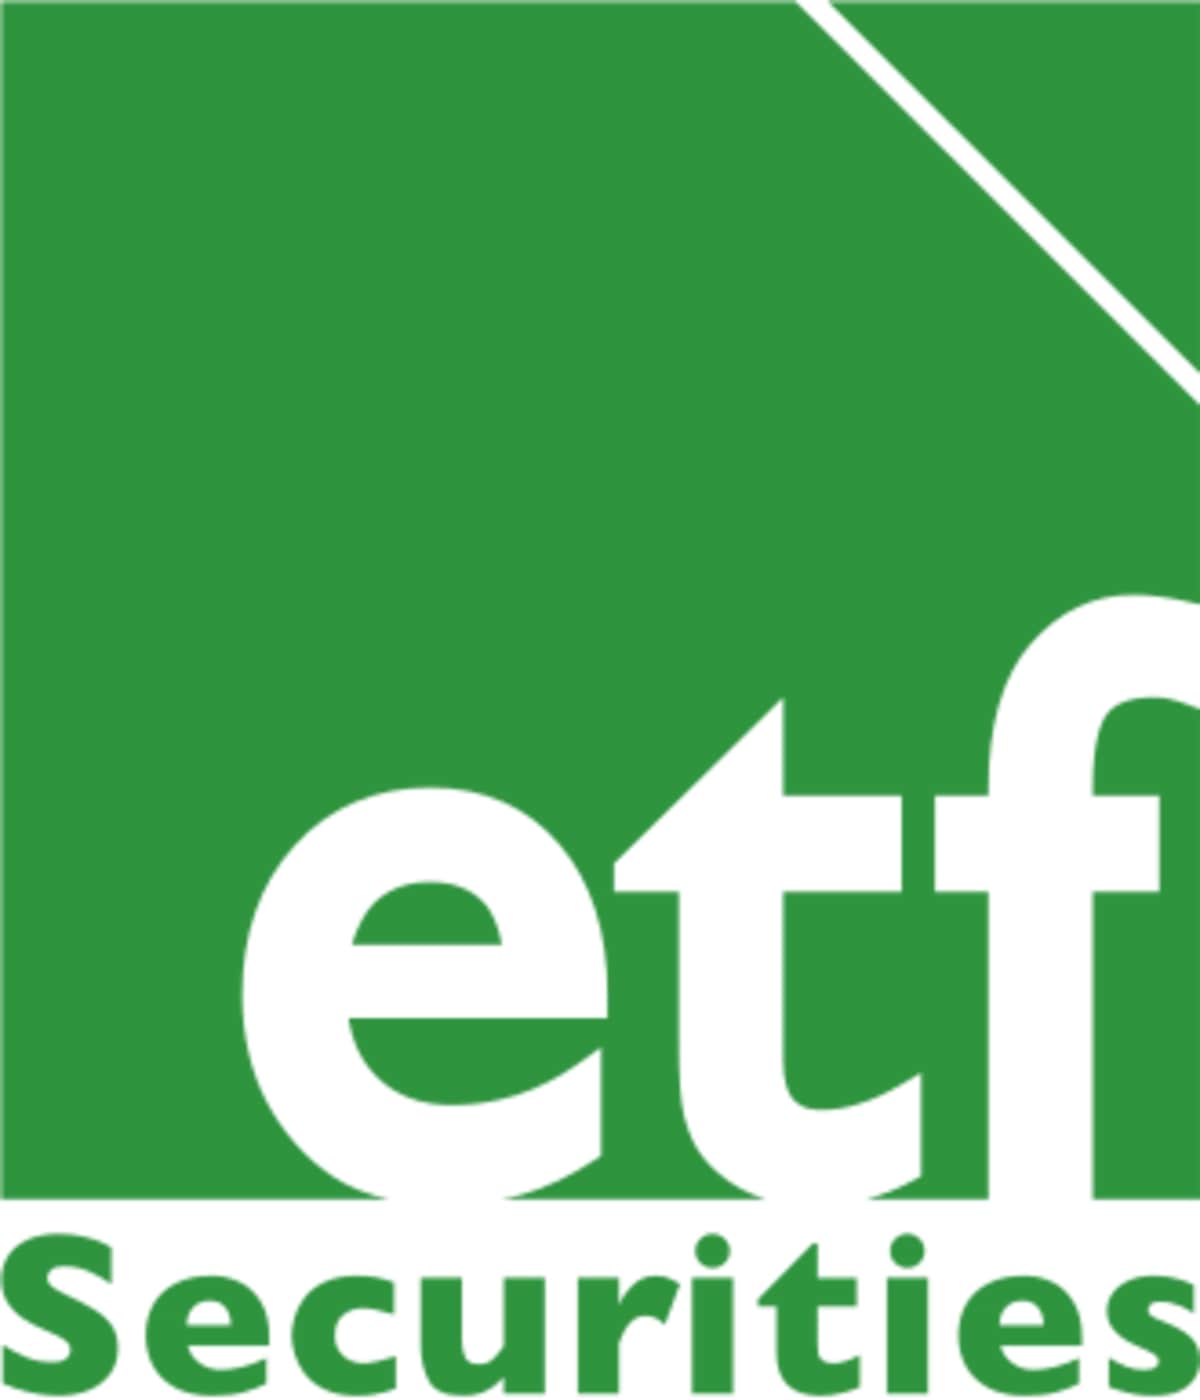 ETF Securities Equity Research: Europe is near to closing the gap with the US